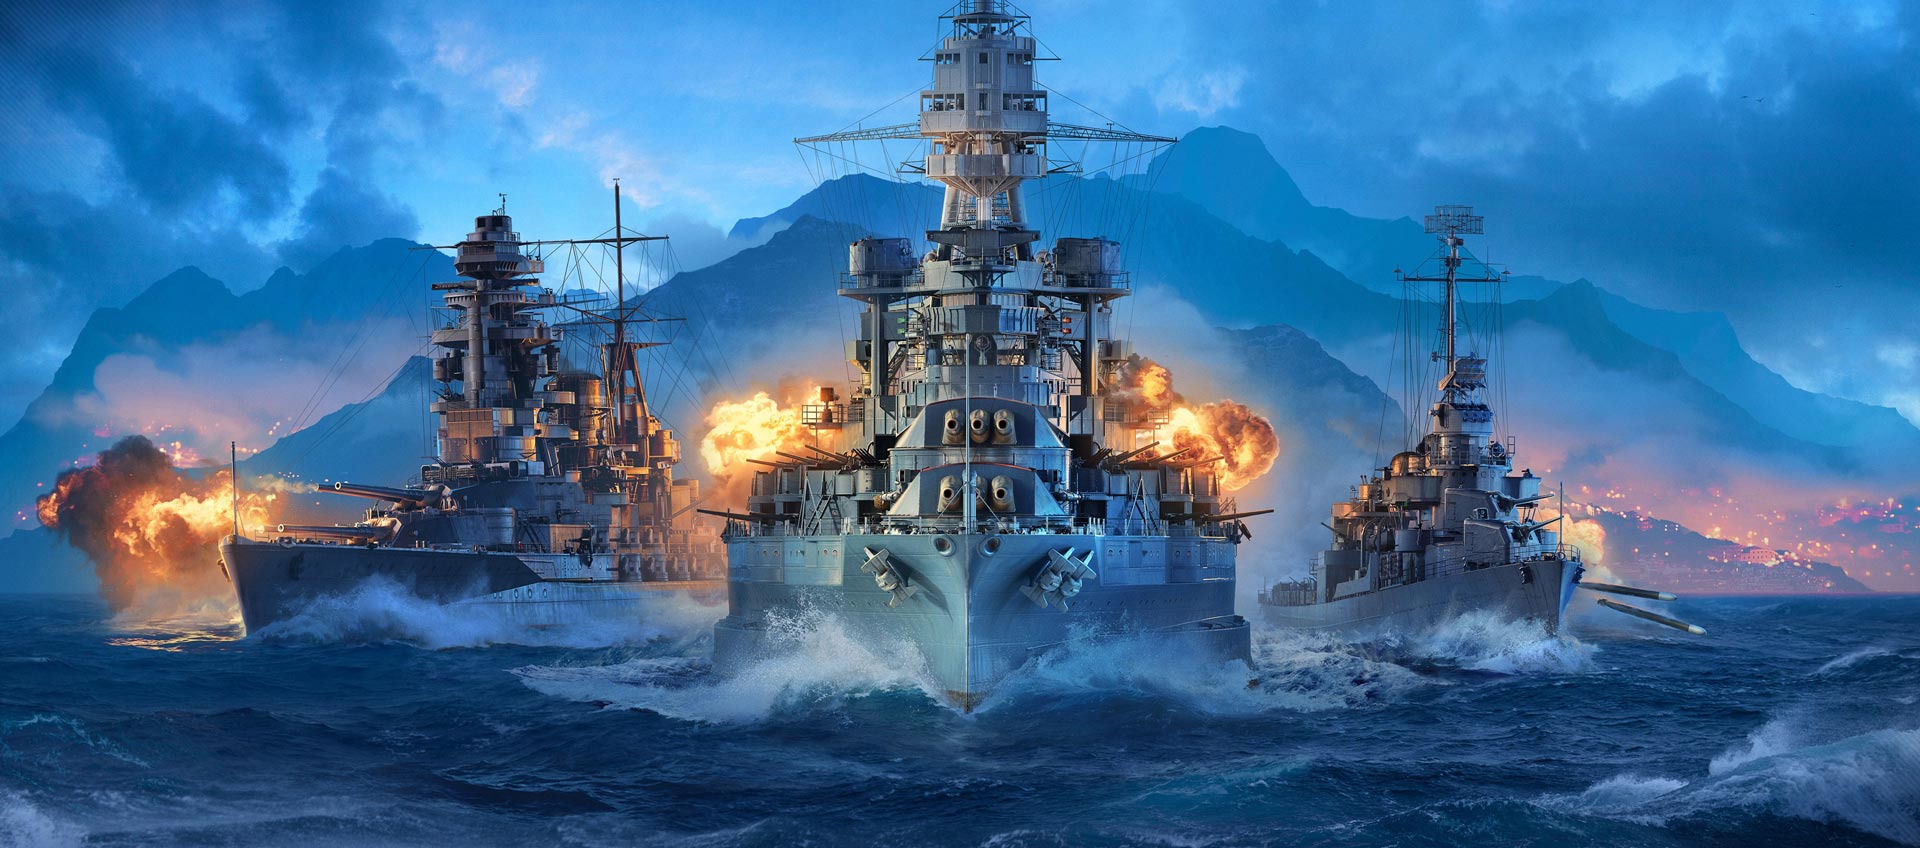 world of warships legends ps4 update 1.08